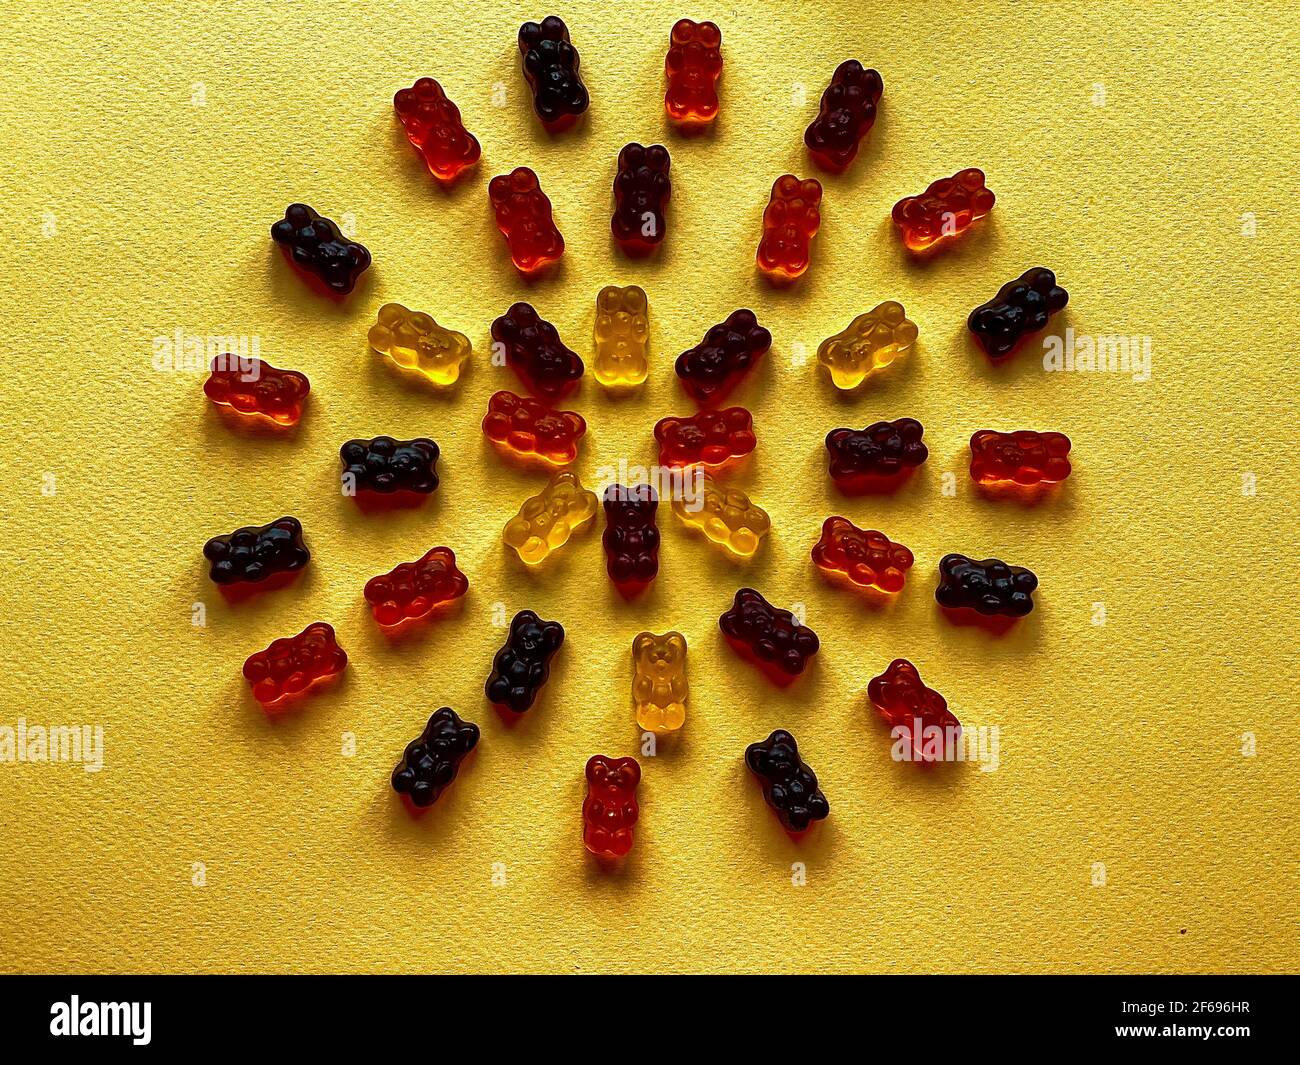 beautifully laid out gummy bears on a yellow background Stock Photo